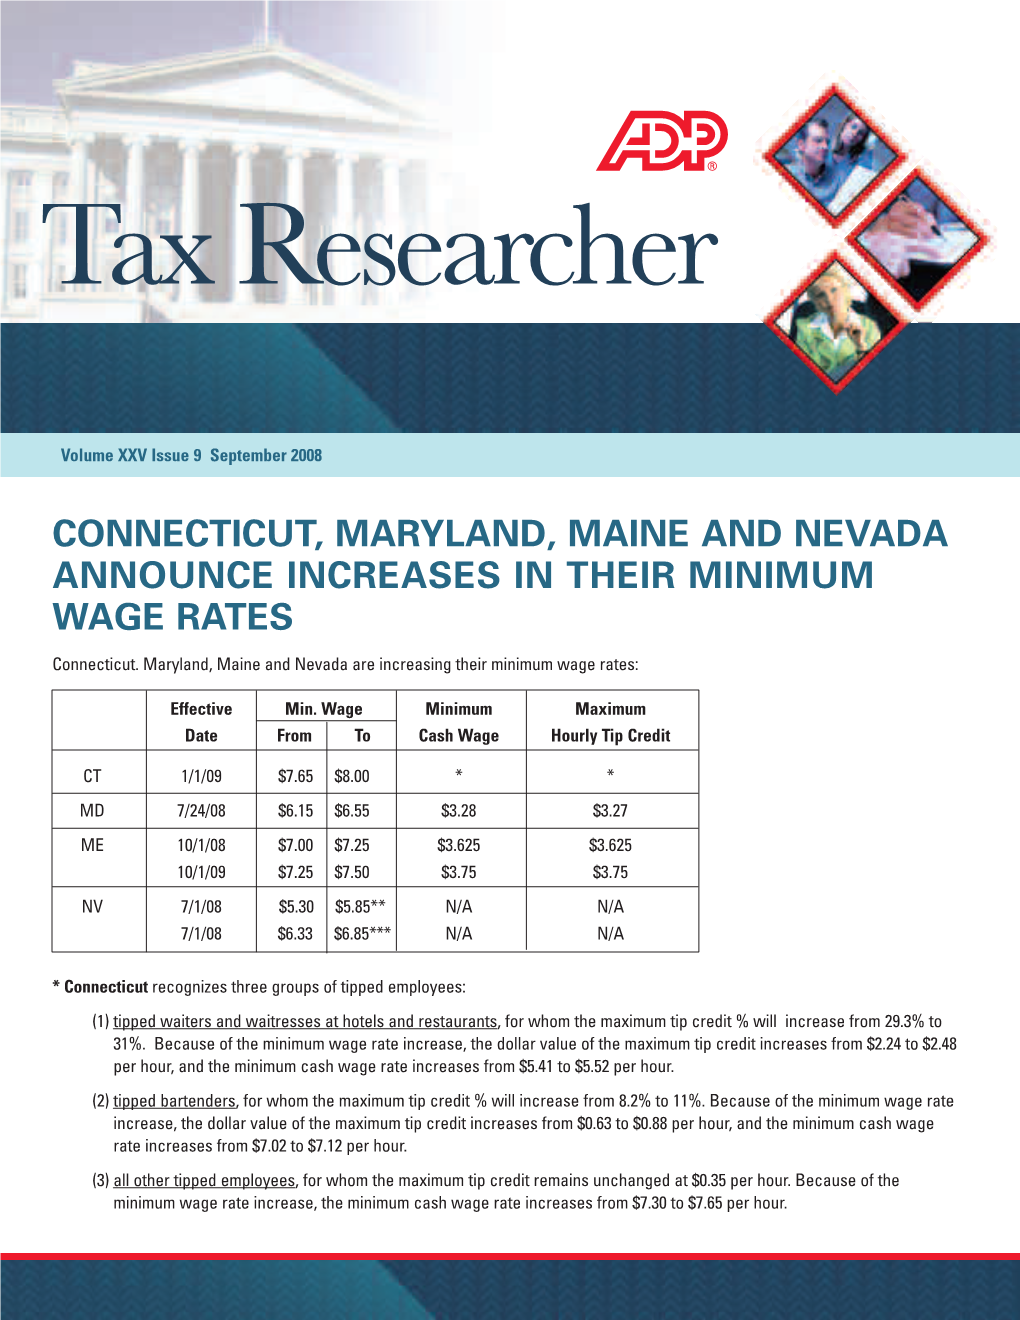 City of Philadelphia, Pa Reduces Local Wage Tax Rates